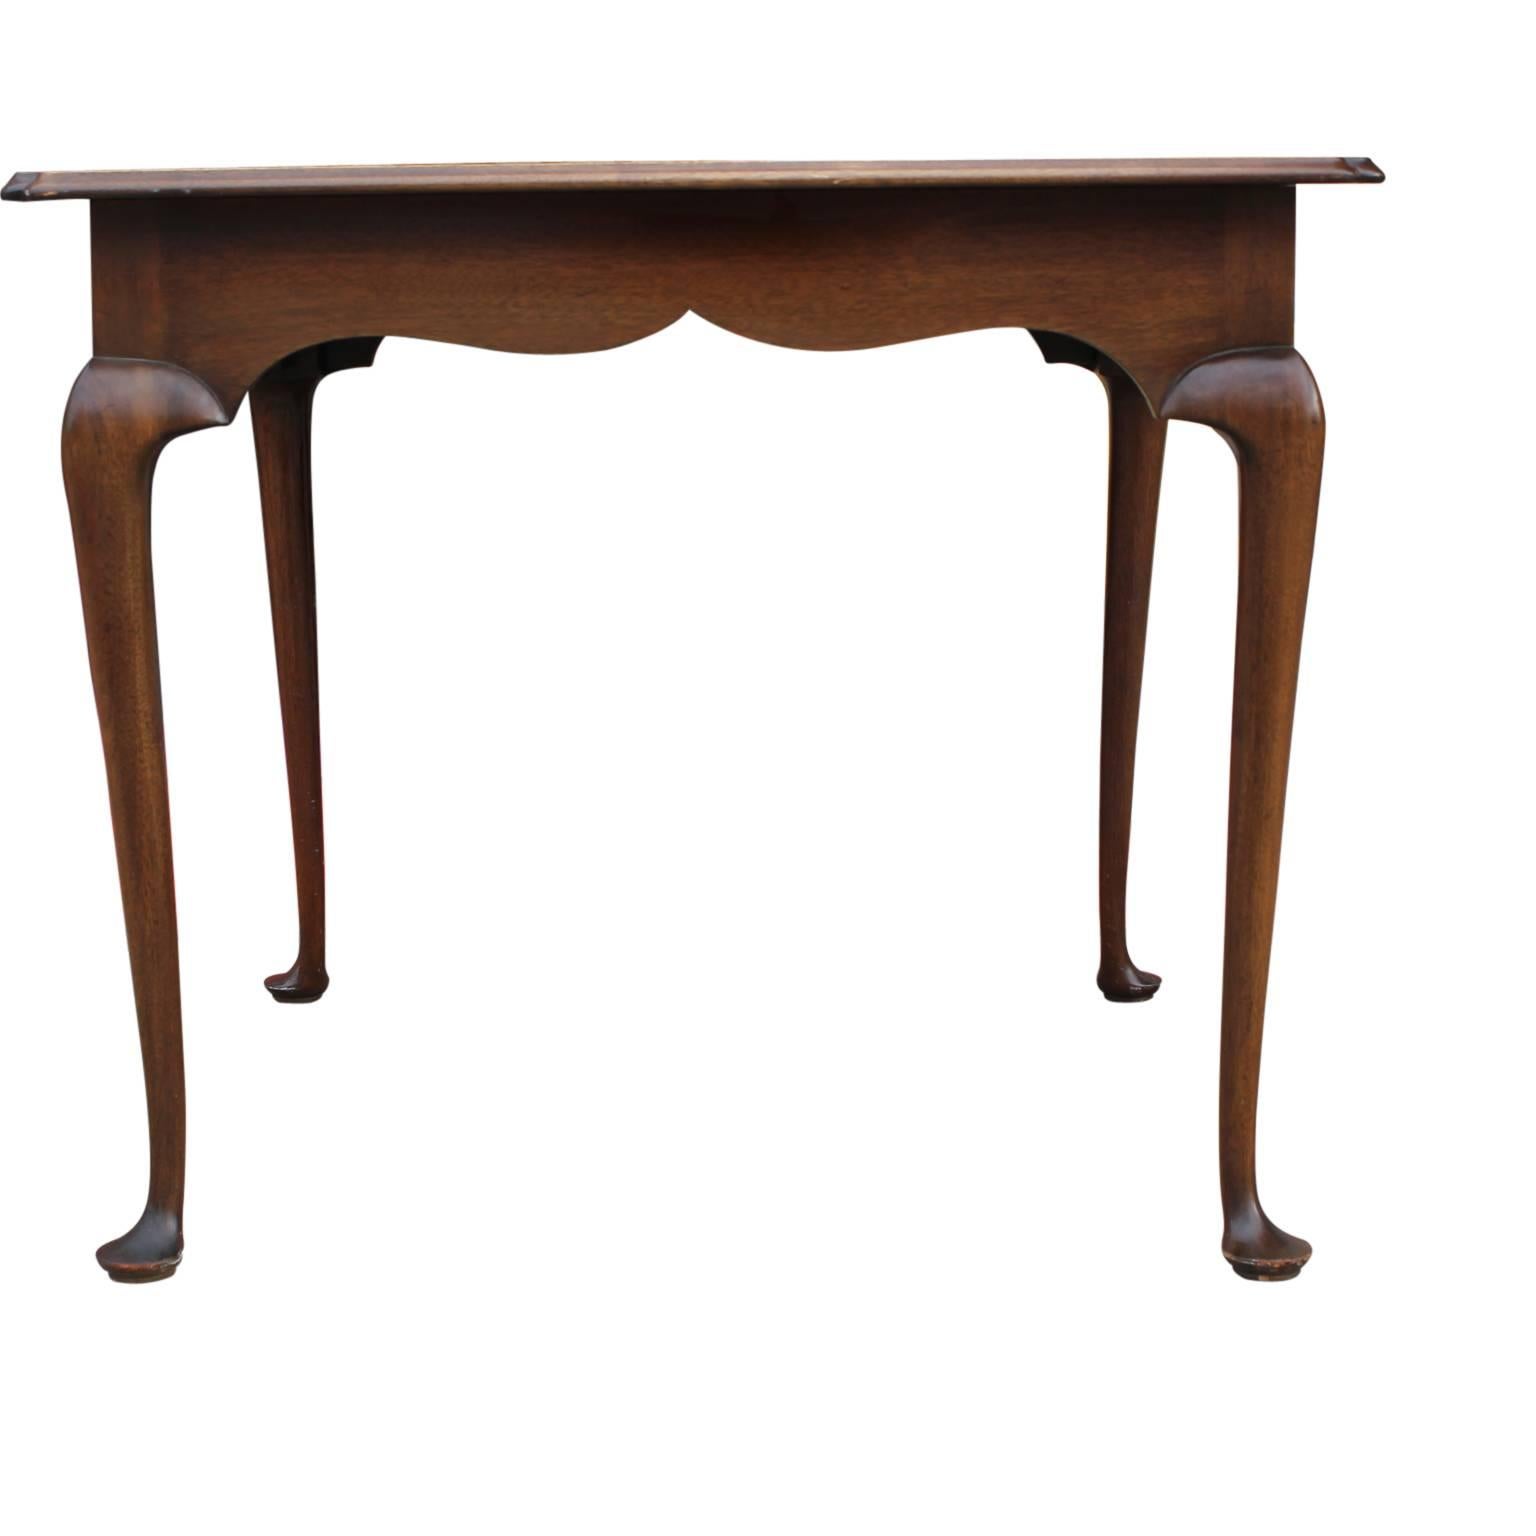 Queen Anne leather topped square game table.